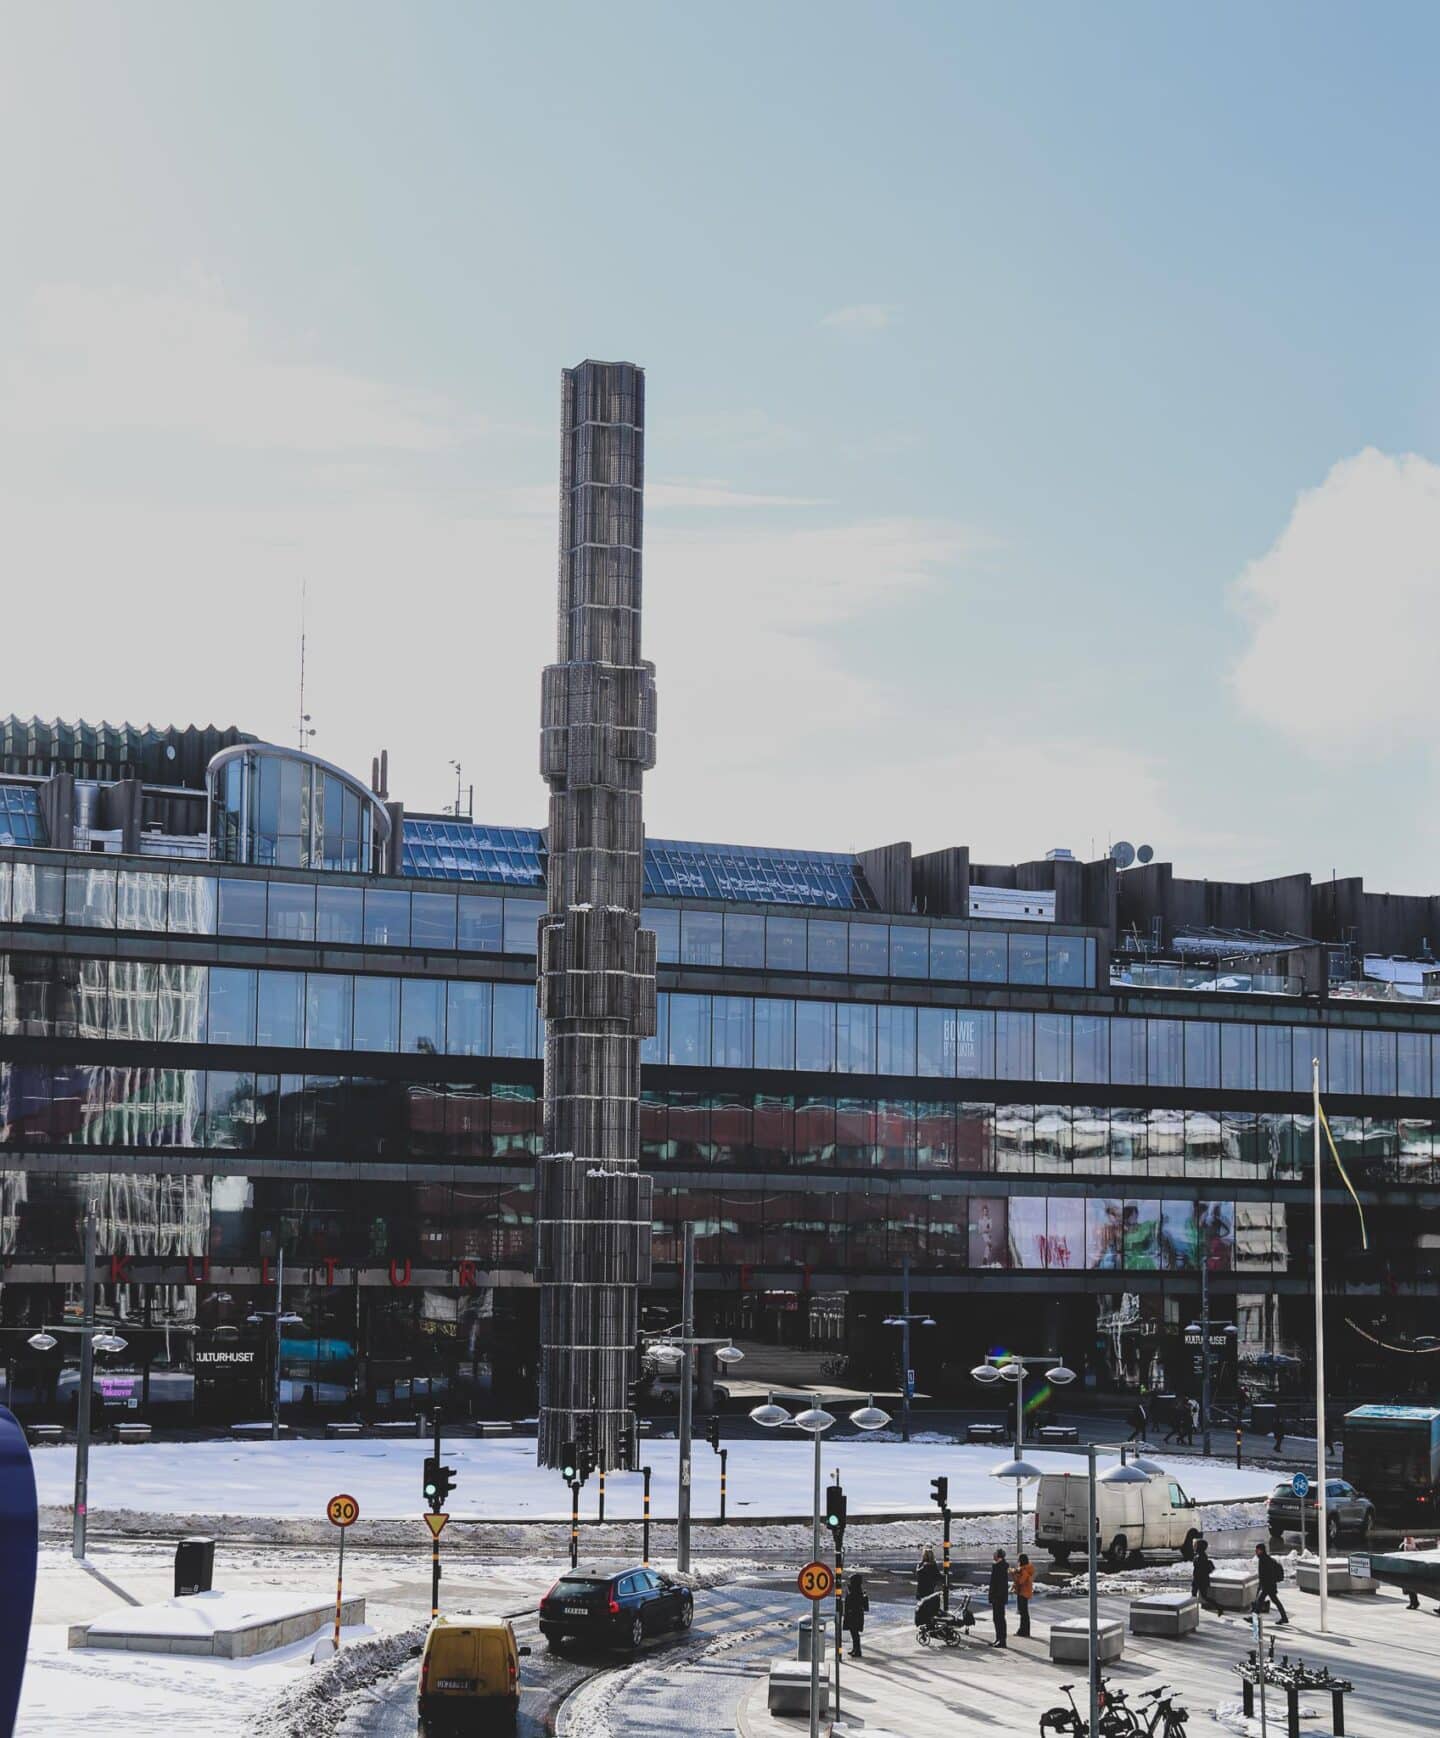 A picture of the glass fountain in Sergels Torg in Stockholm